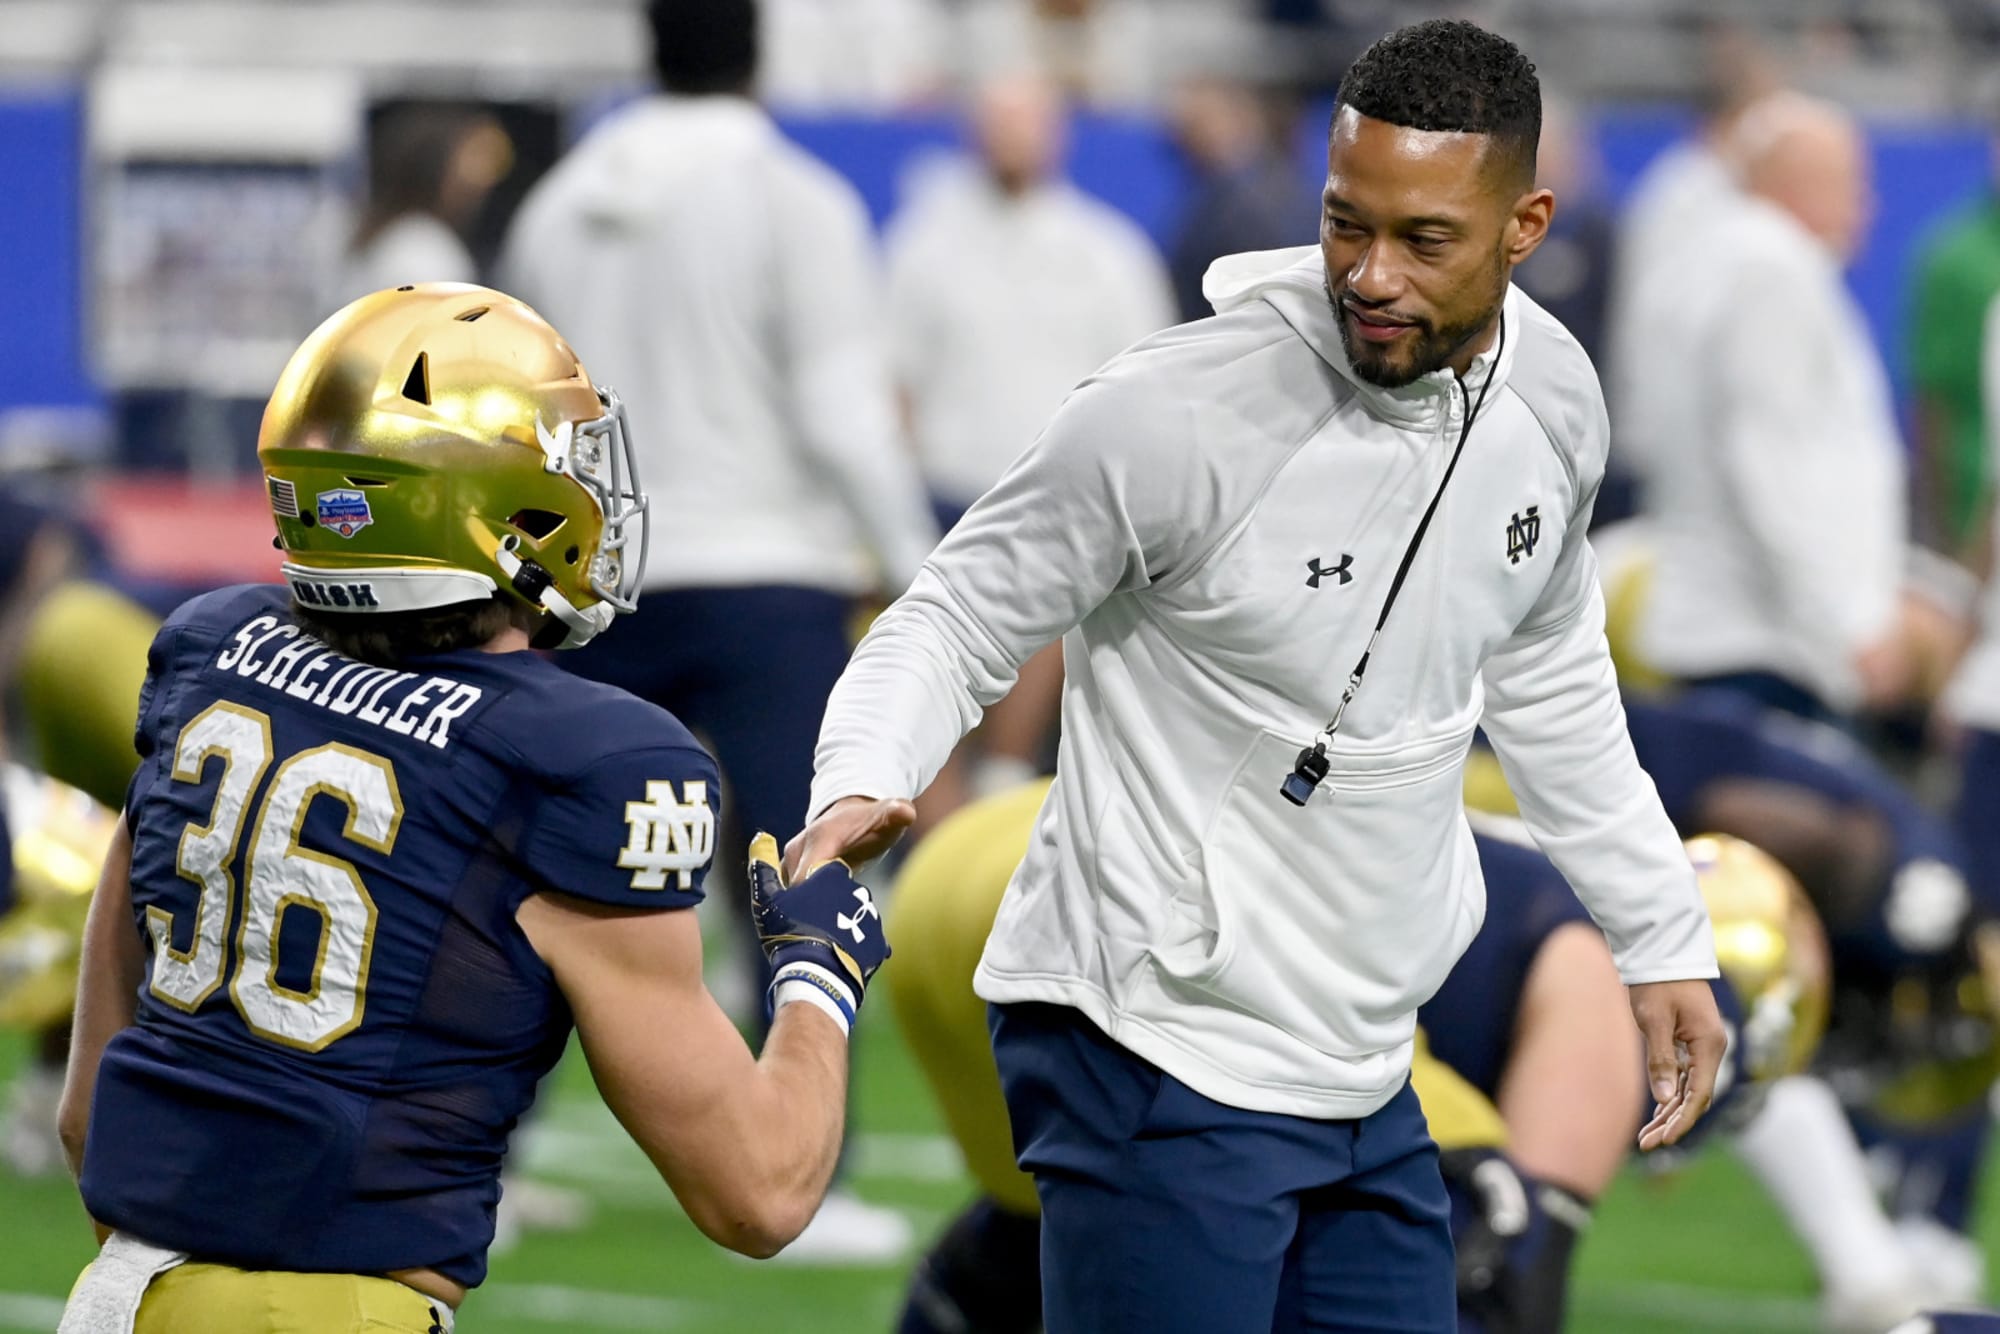 Notre Dame football How to watch the 2022 BlueGold Game